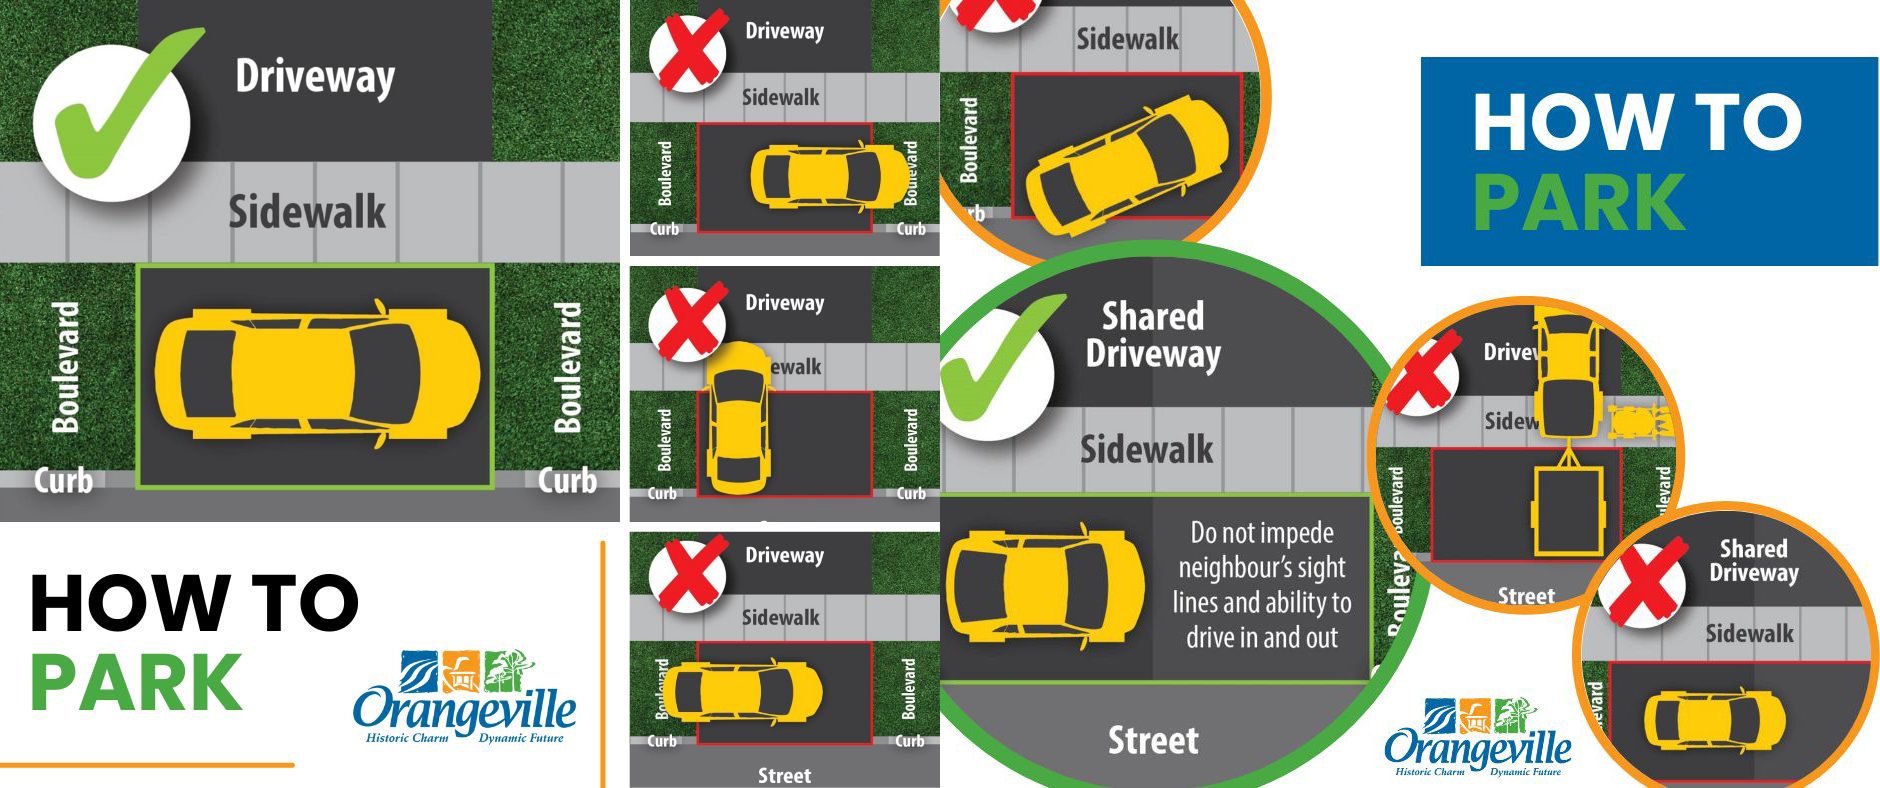 A graphic demonstrating correct and incorrect ways to park on the lower boulevard portion of a driveway